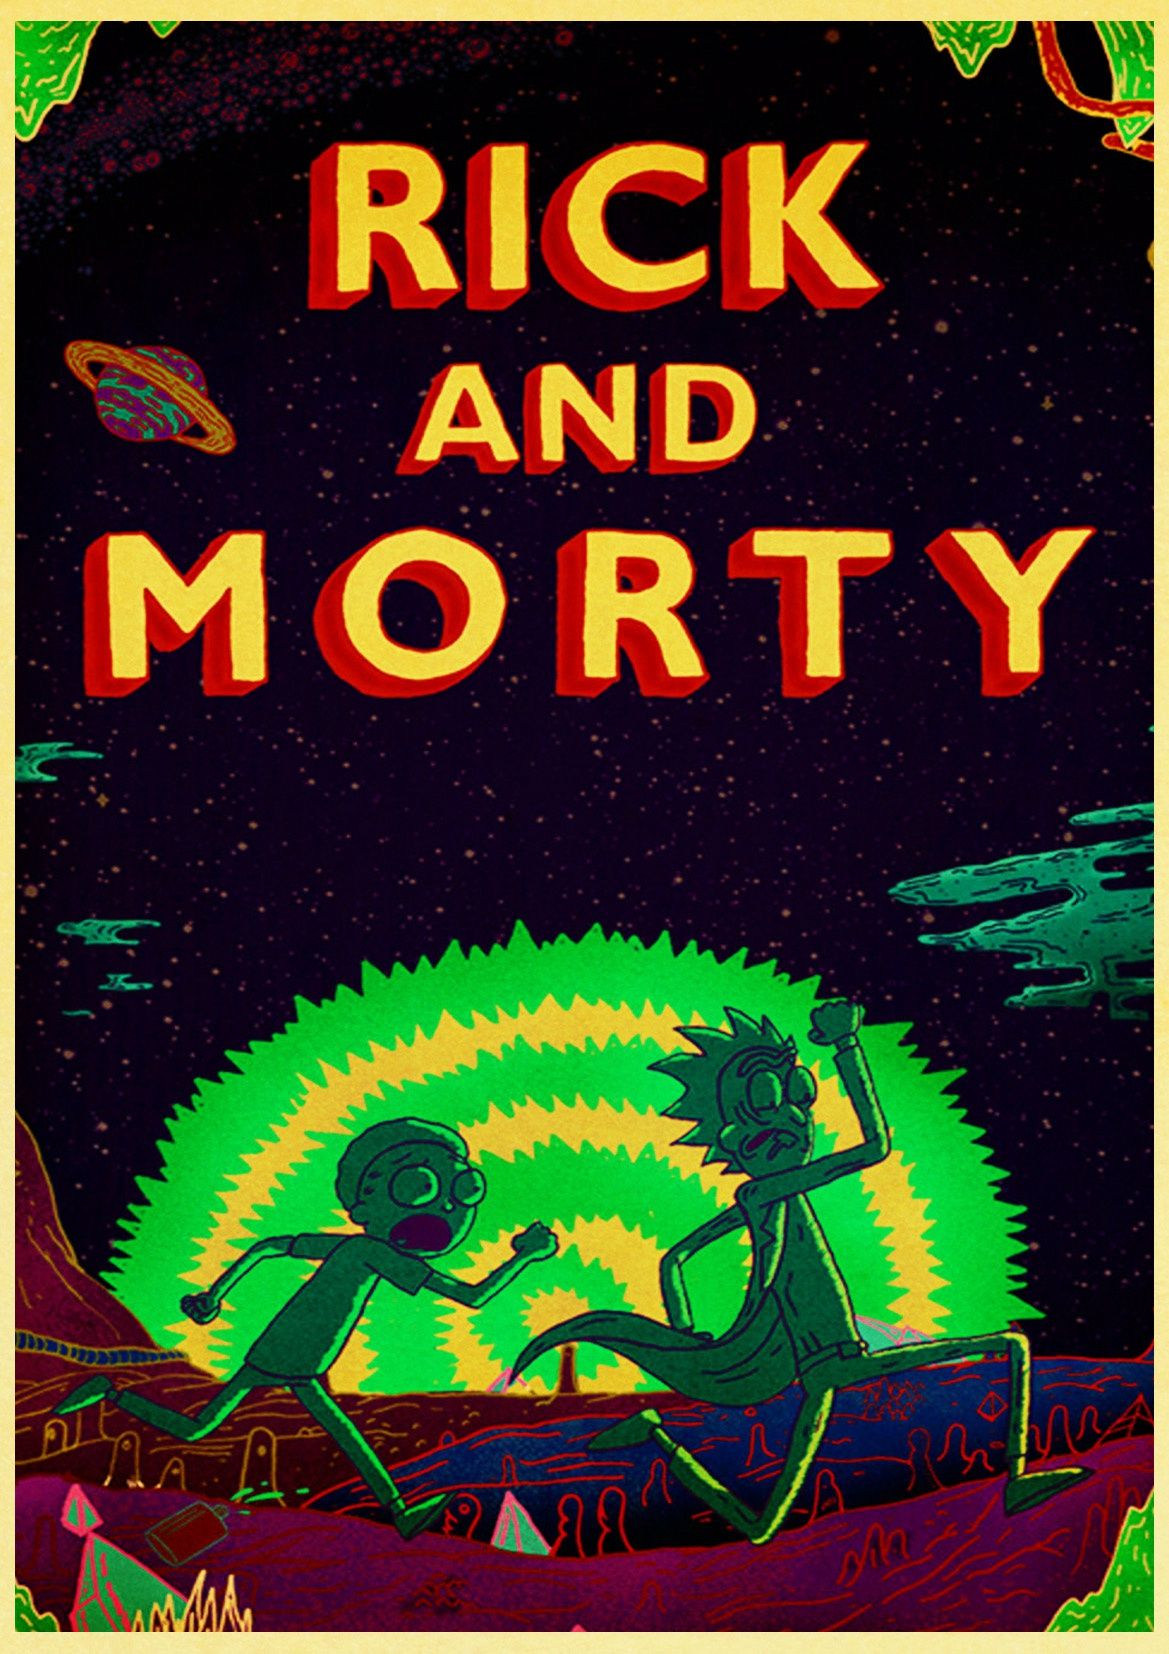 New Rick And Morty 2020 Wallpapers